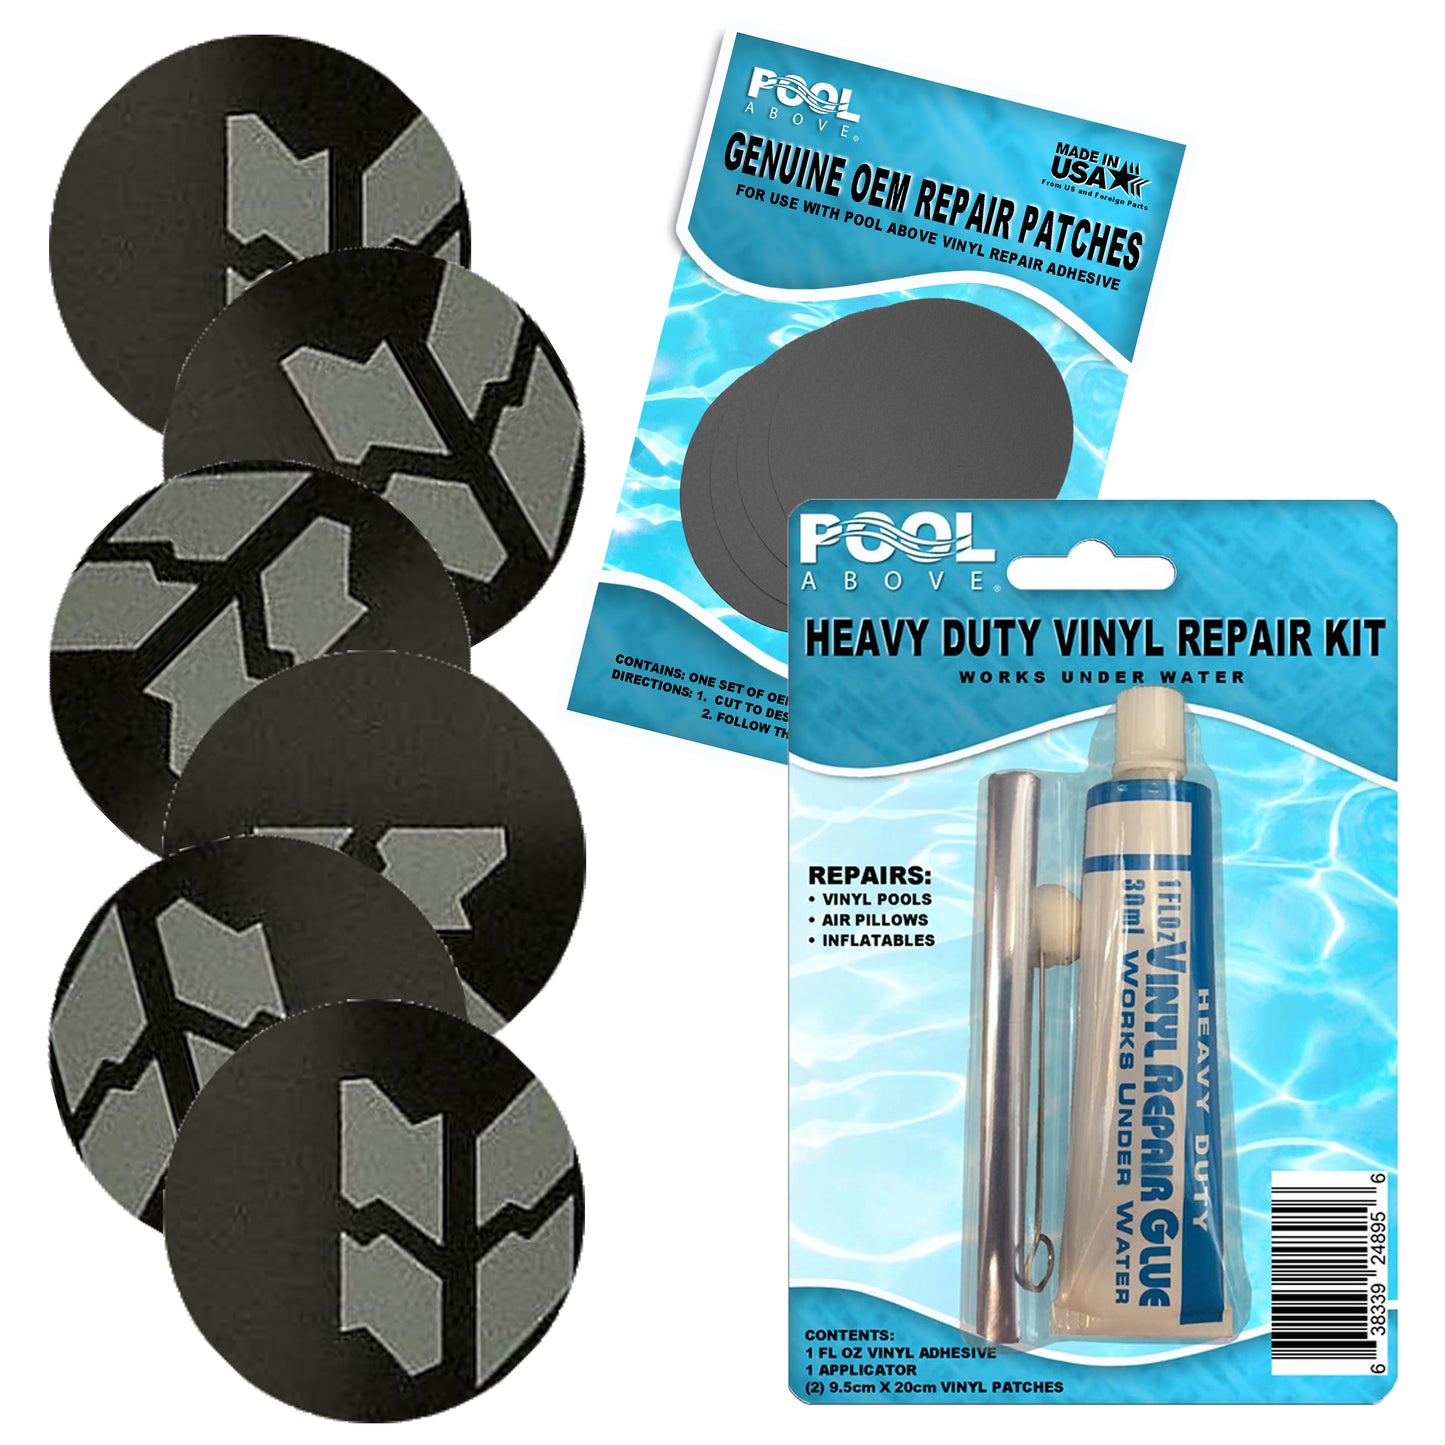 Repair Kit for Inflatables, Pool Liners, Vinyl Applications | Vinyl Patches and Glue